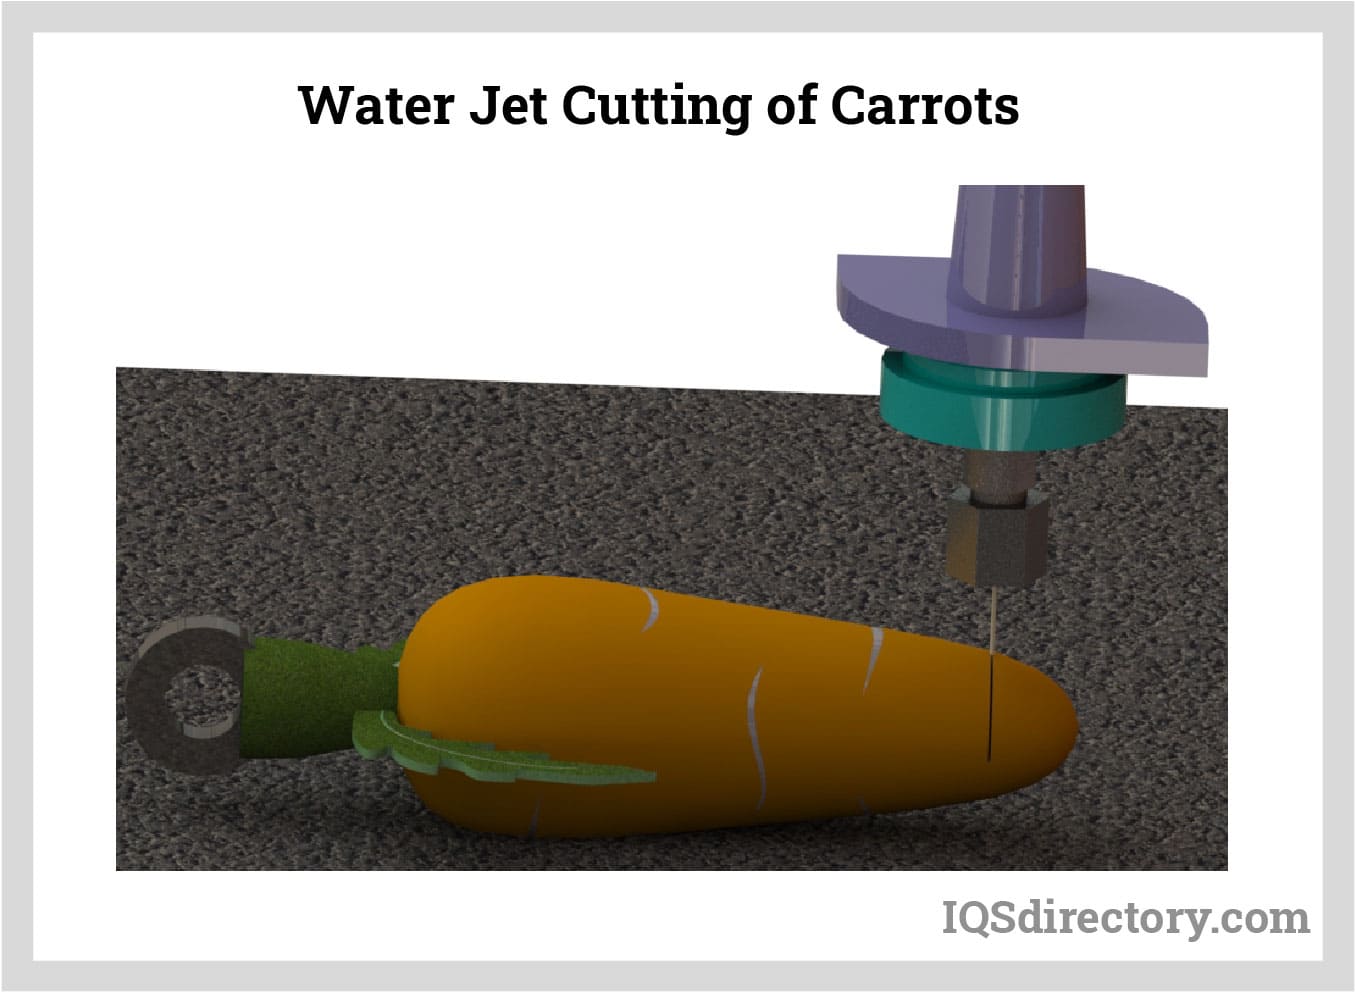 Water Jet Cutting of Carrots